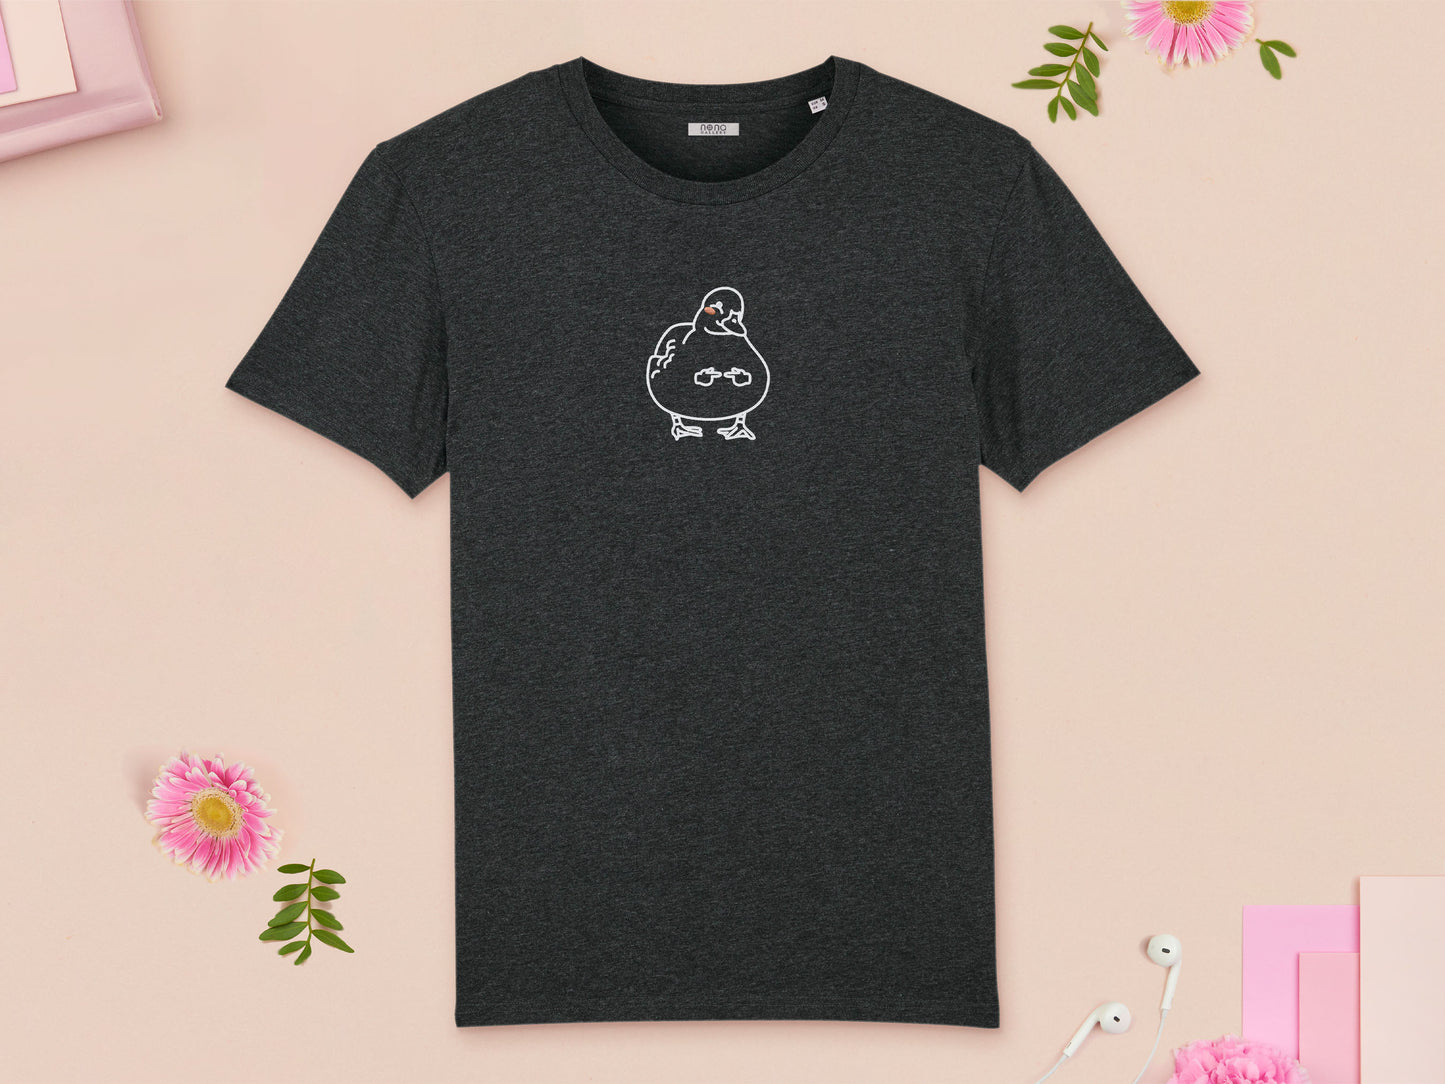 A grey crew neck short sleeve t-shirt, with an embroidered black thread design of cute blushing duck with the for me finger hand emoji symbols